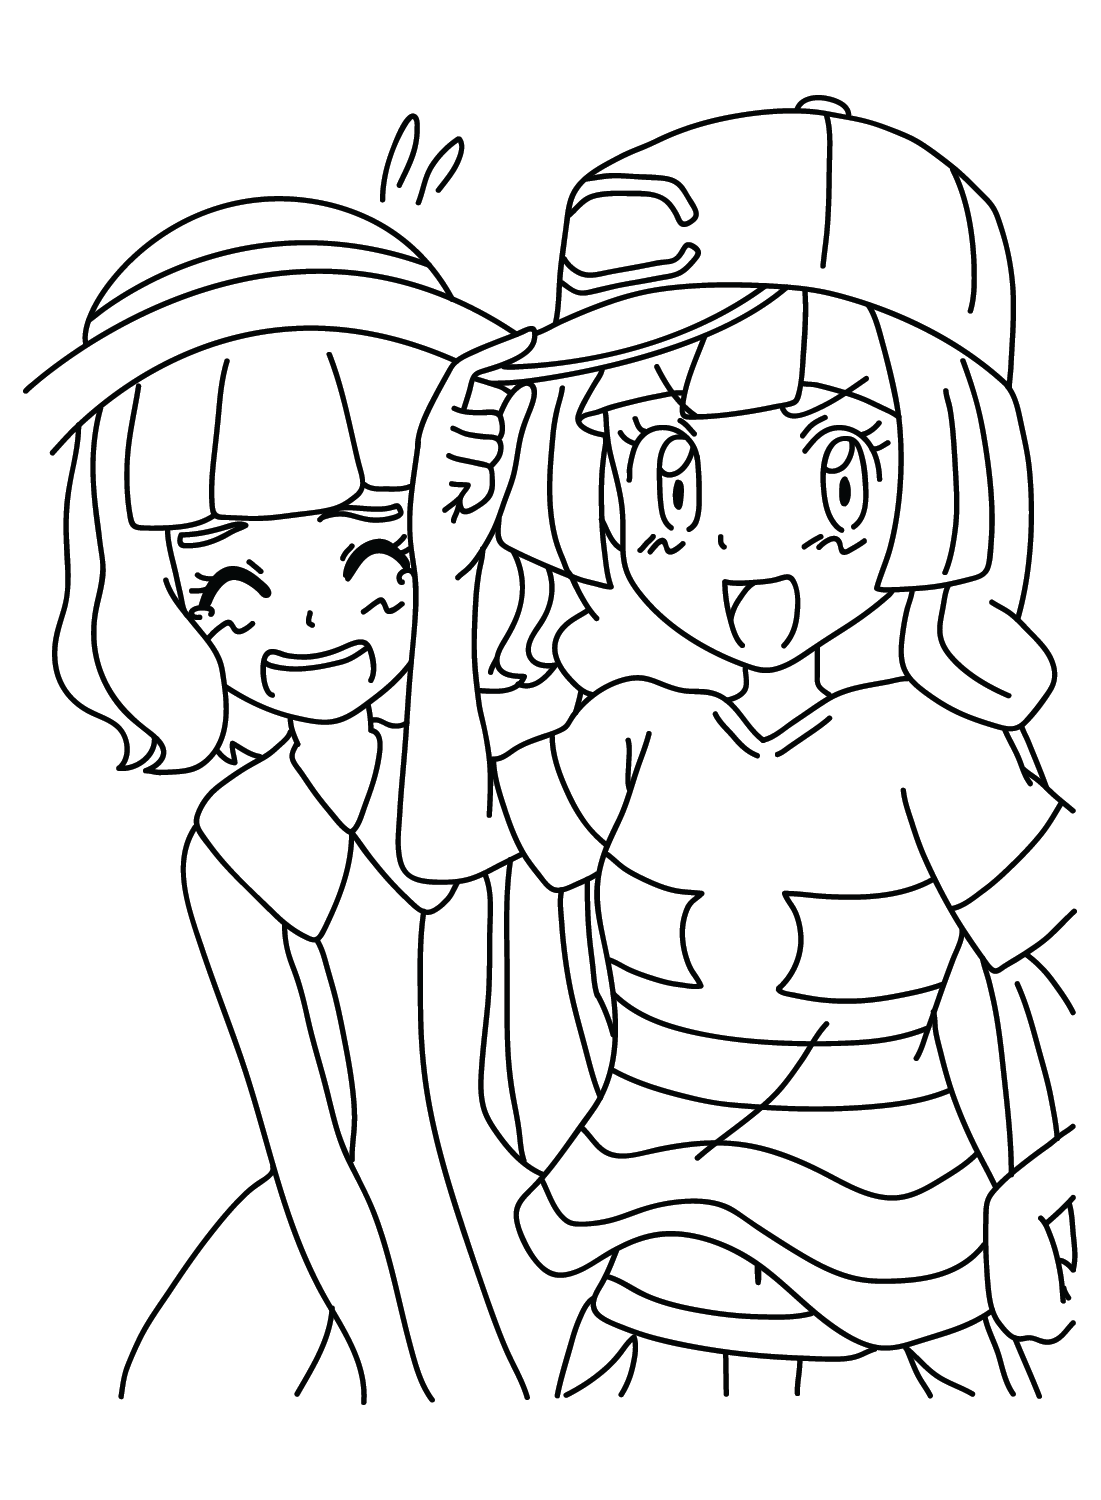 Lillie and Serena Pokemon to Color from Lillie Pokemon